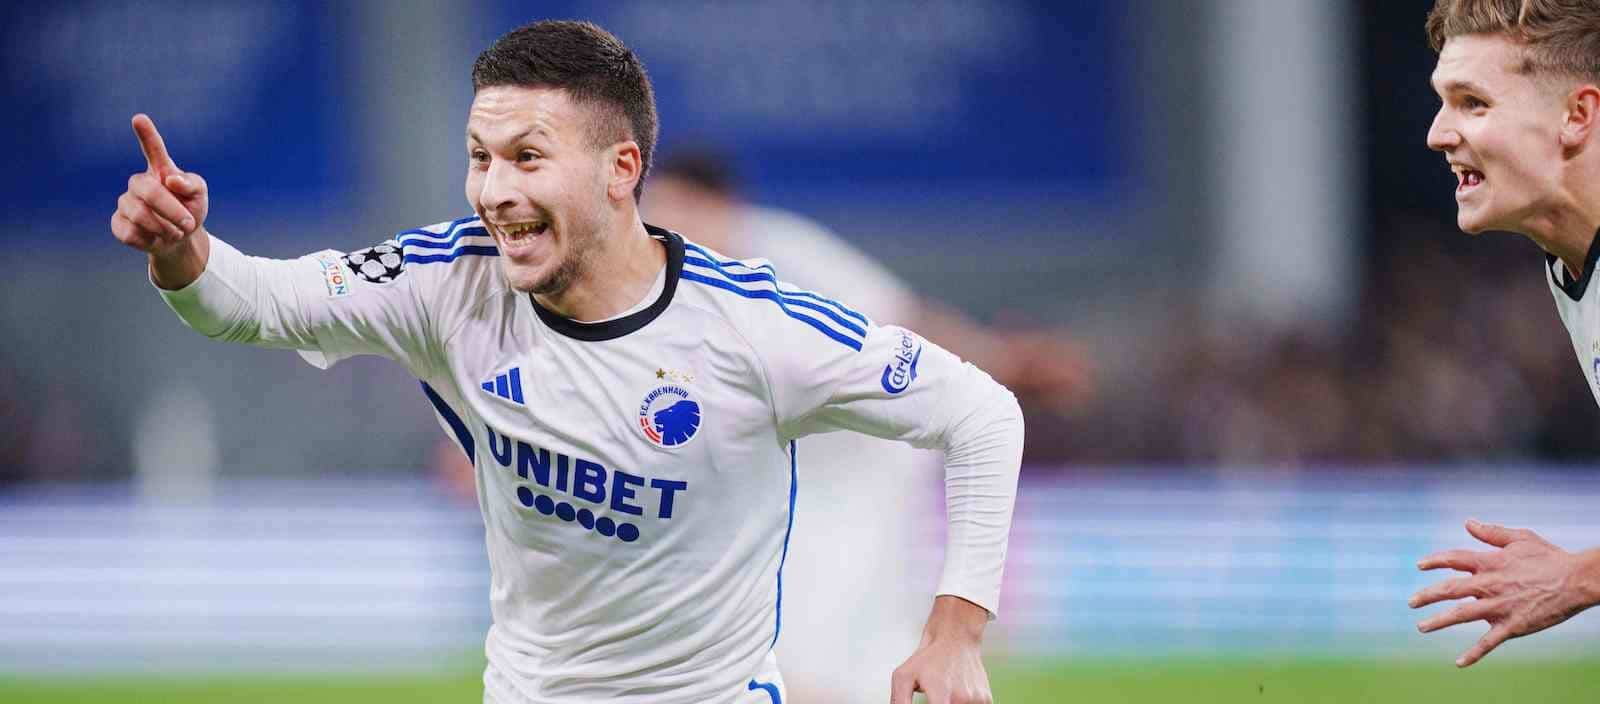 FC Copenhagen ready to cash in on young star Roony Bardghji in January with a massive queue forming for his signature – Man United News And Transfer News